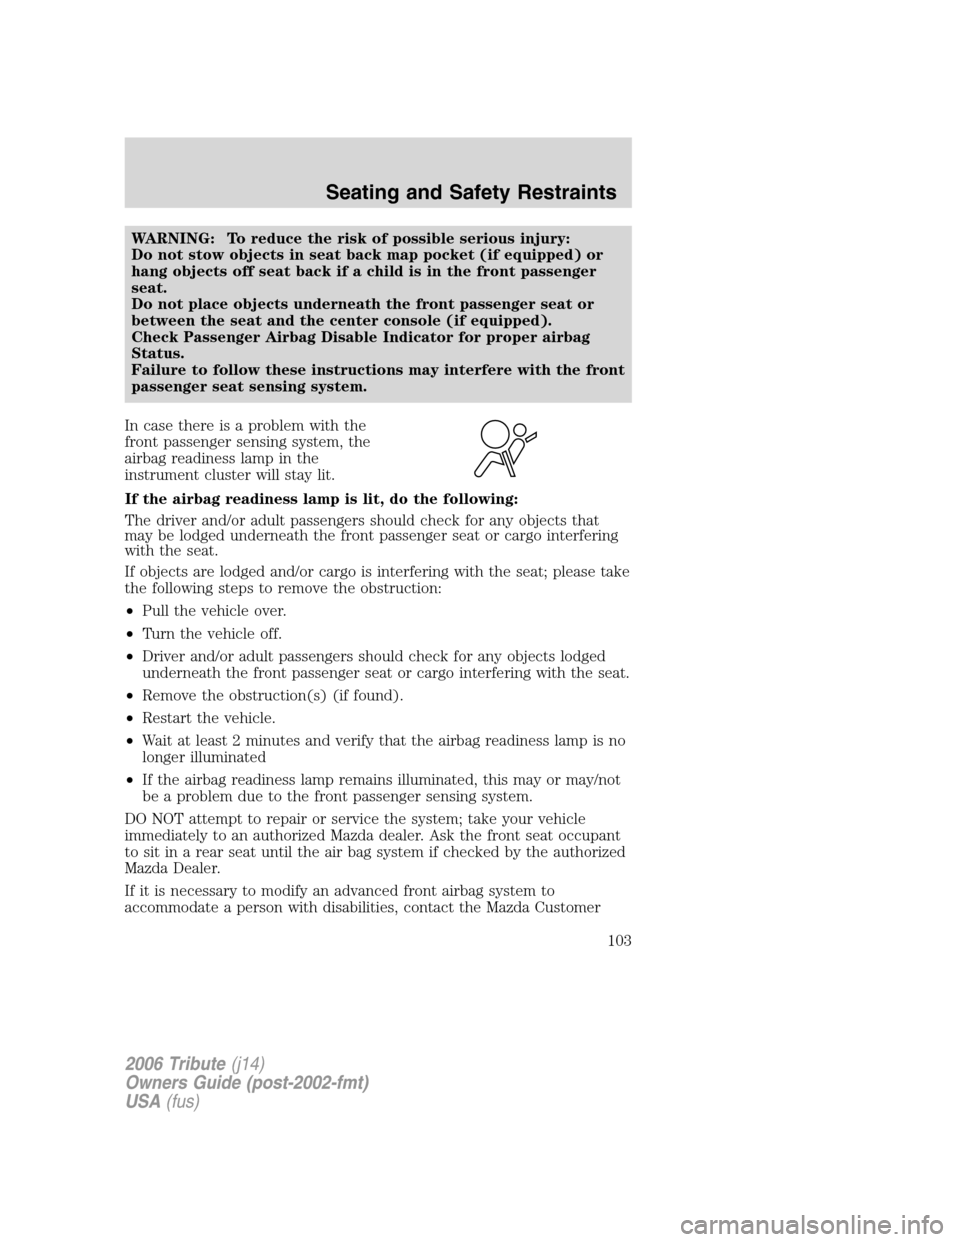 MAZDA MODEL TRIBUTE 2006  Owners Manual (in English) WARNING: To reduce the risk of possible serious injury:
Do not stow objects in seat back map pocket (if equipped) or
hang objects off seat back if a child is in the front passenger
seat.
Do not place 